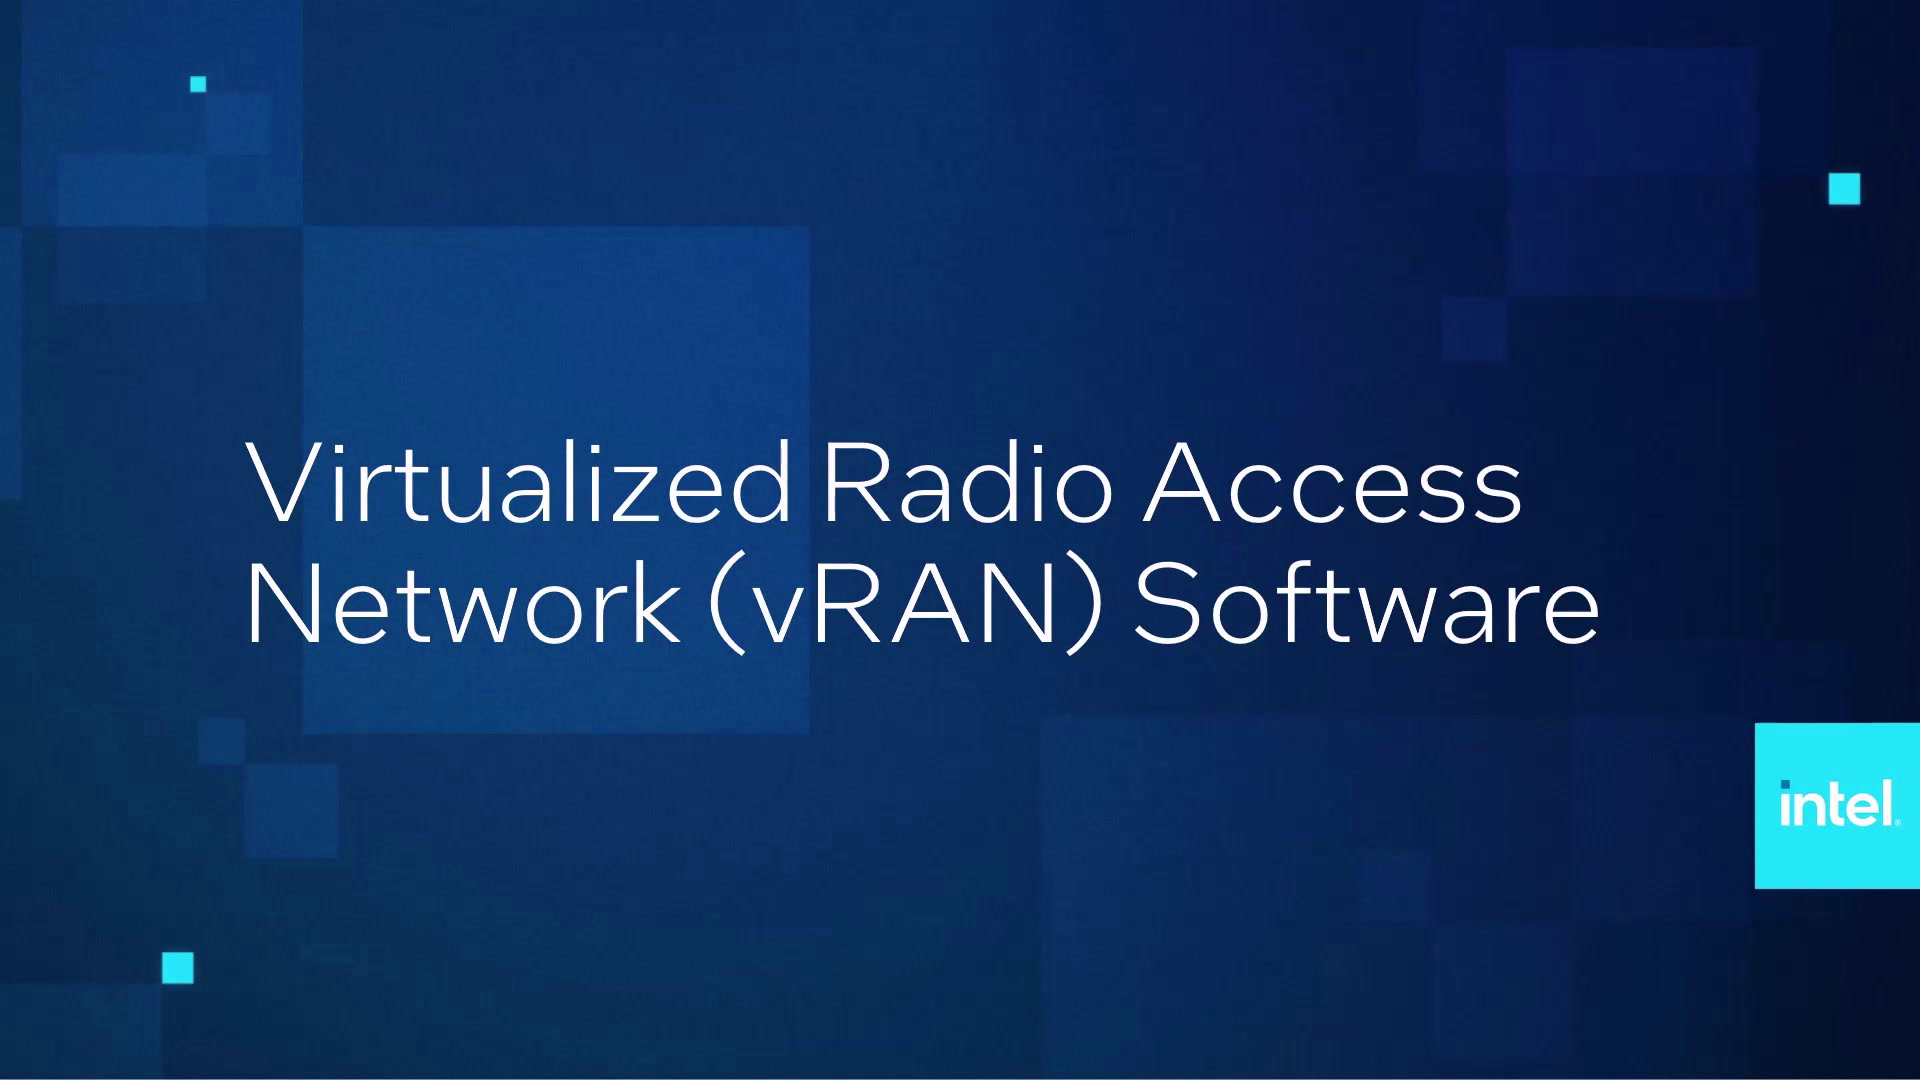 Virtualized Radio Access Networks (vRAN) Software